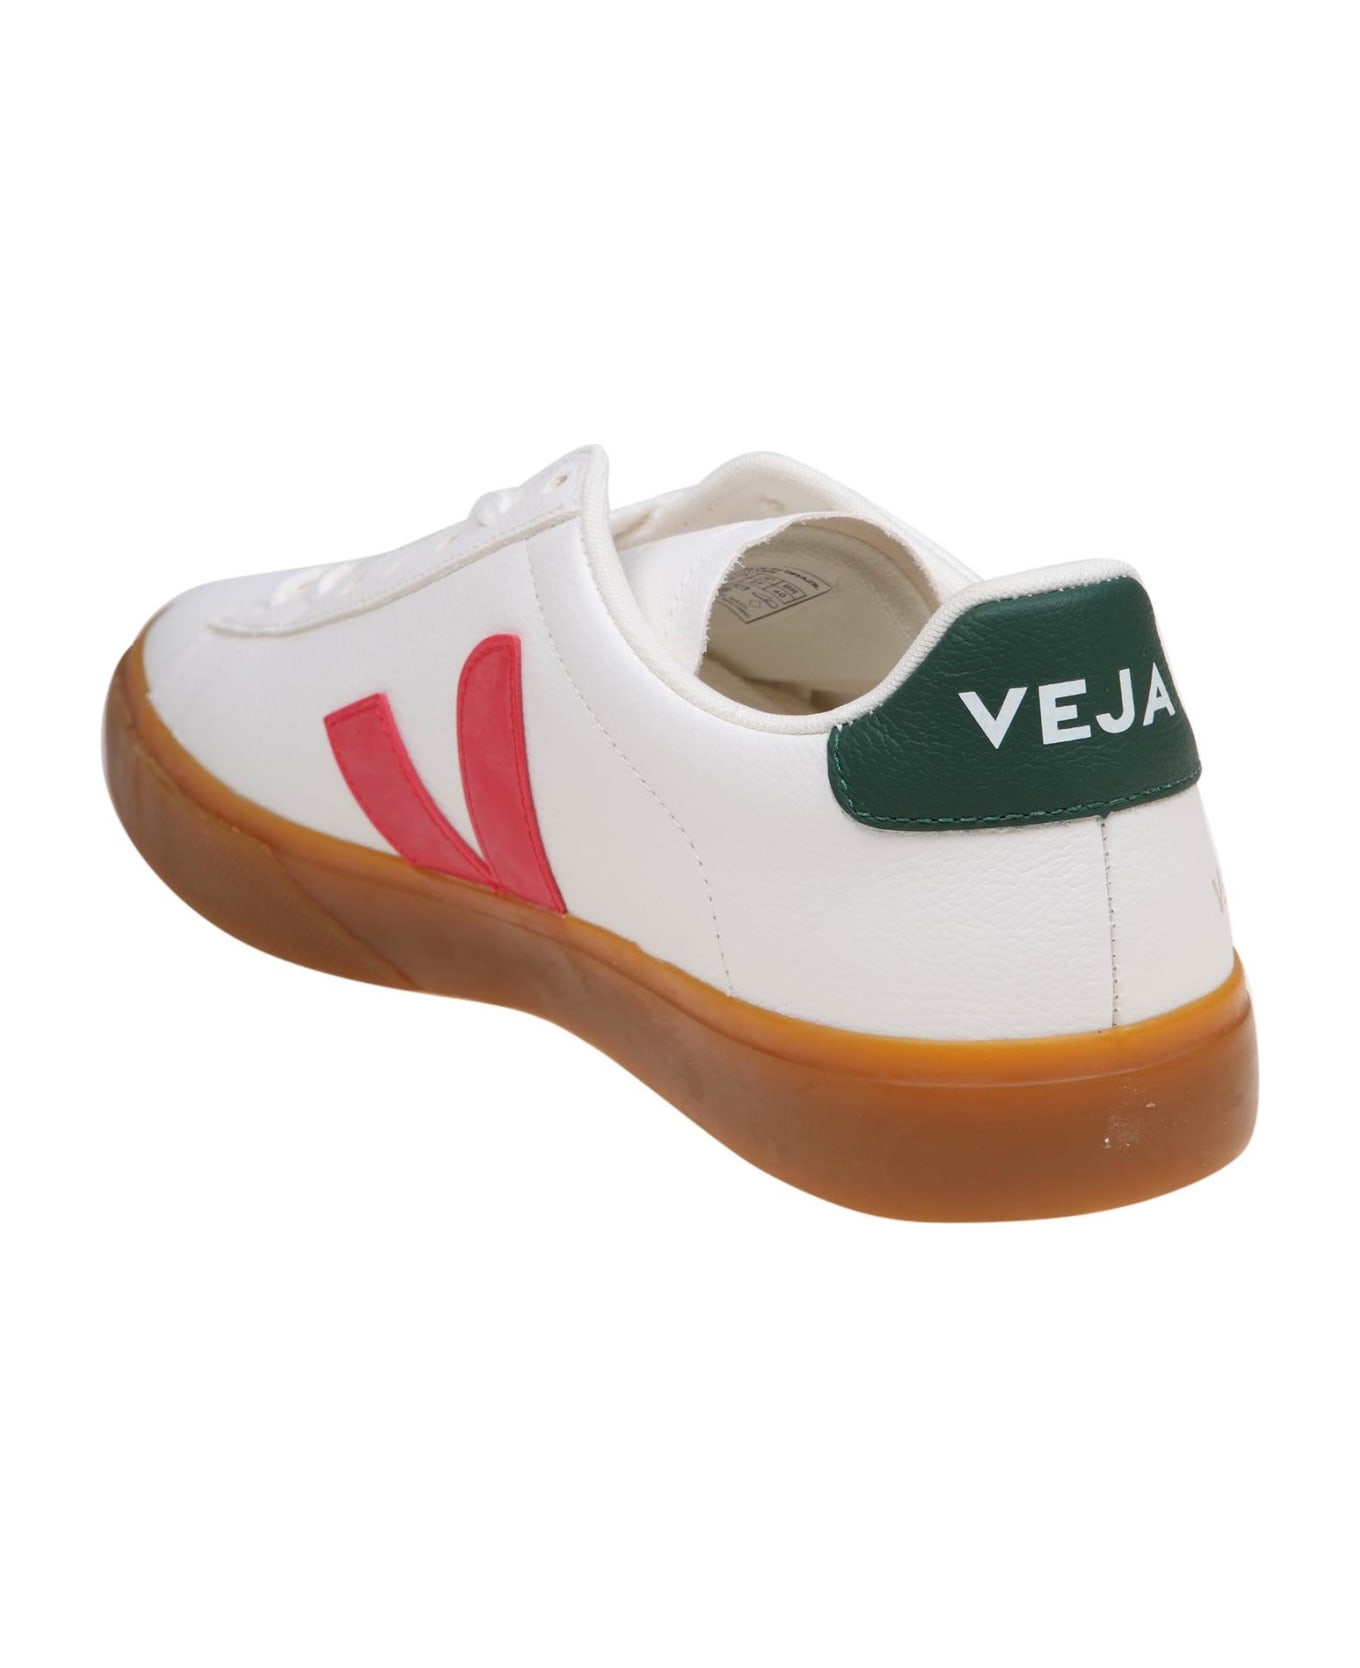 Veja Campo Chromefree In White/red And Green Leather - WHITE/POKER